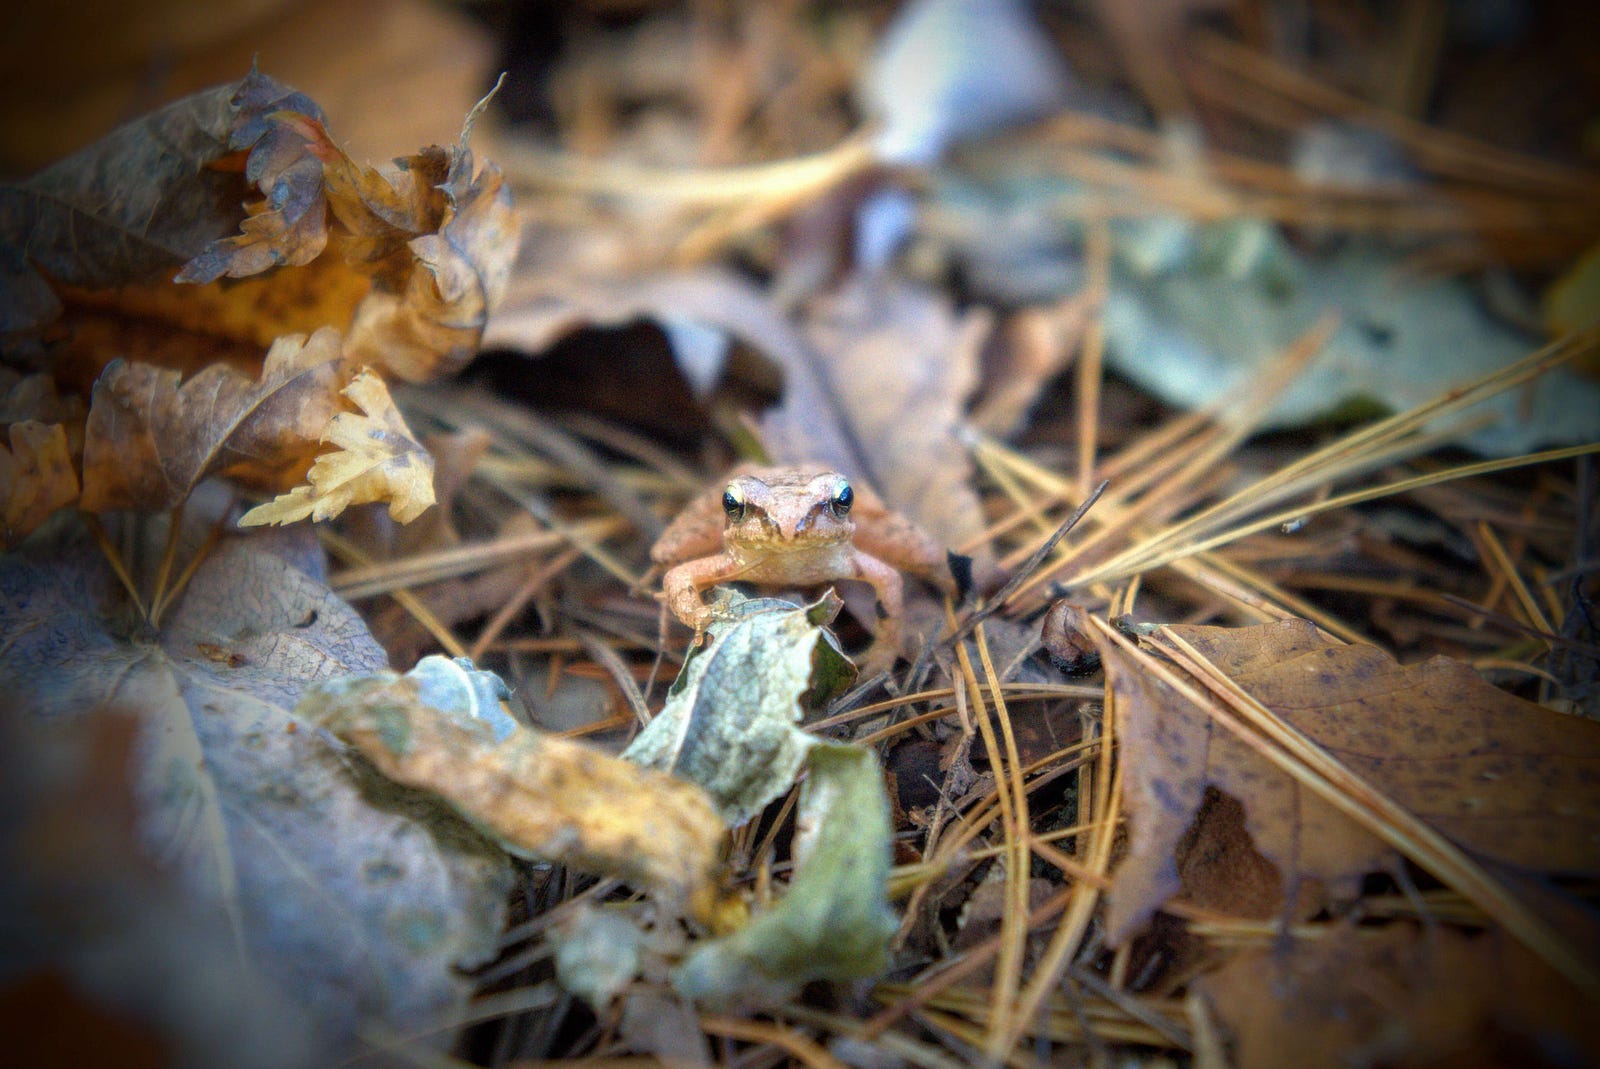 A tiny brown frog found amongst the fallen leaves along the path up Mt. Hokari